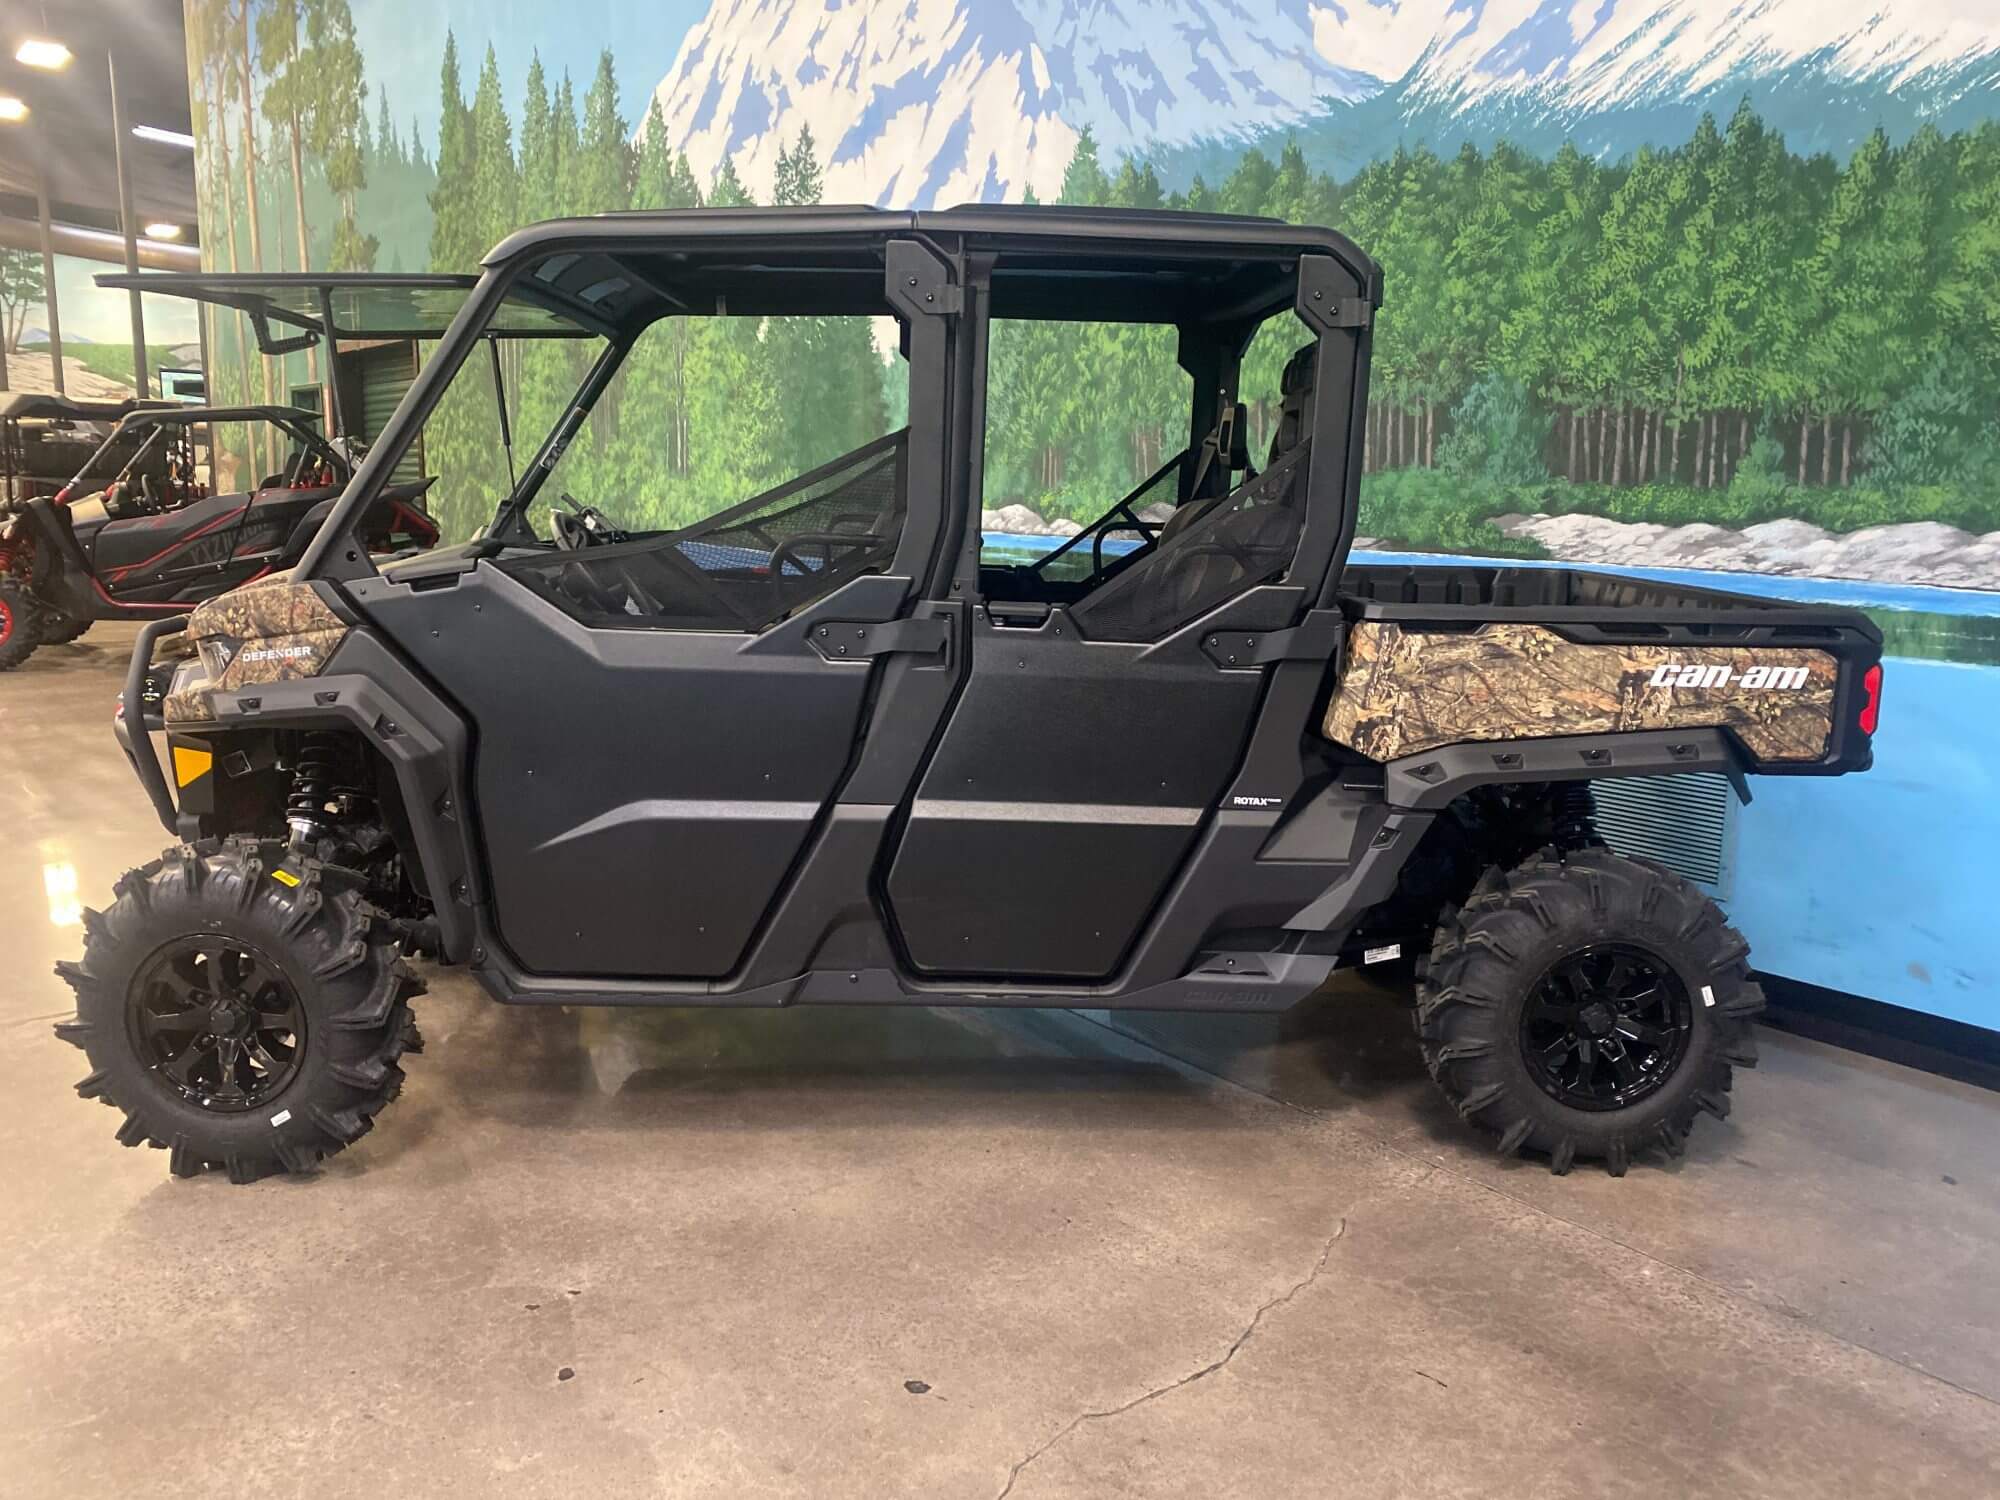 Defender Six Seater UTV showcased in dealership with a mountain forest backdrop